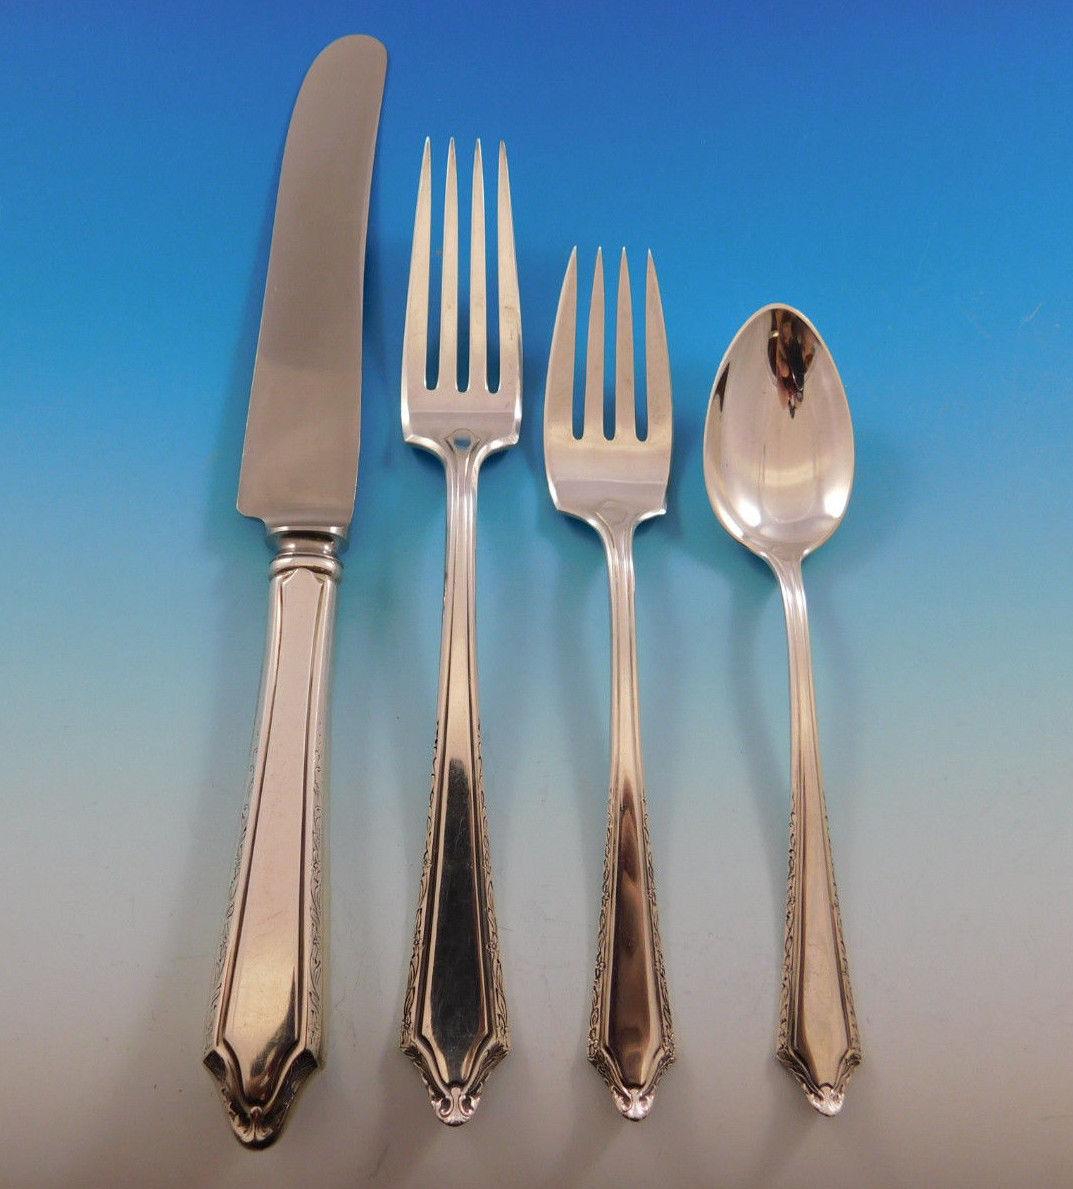 Dorothy Manners by Towle sterling silver Flatware set - 39 pieces. This set includes:

Eight knives, 9 1/4